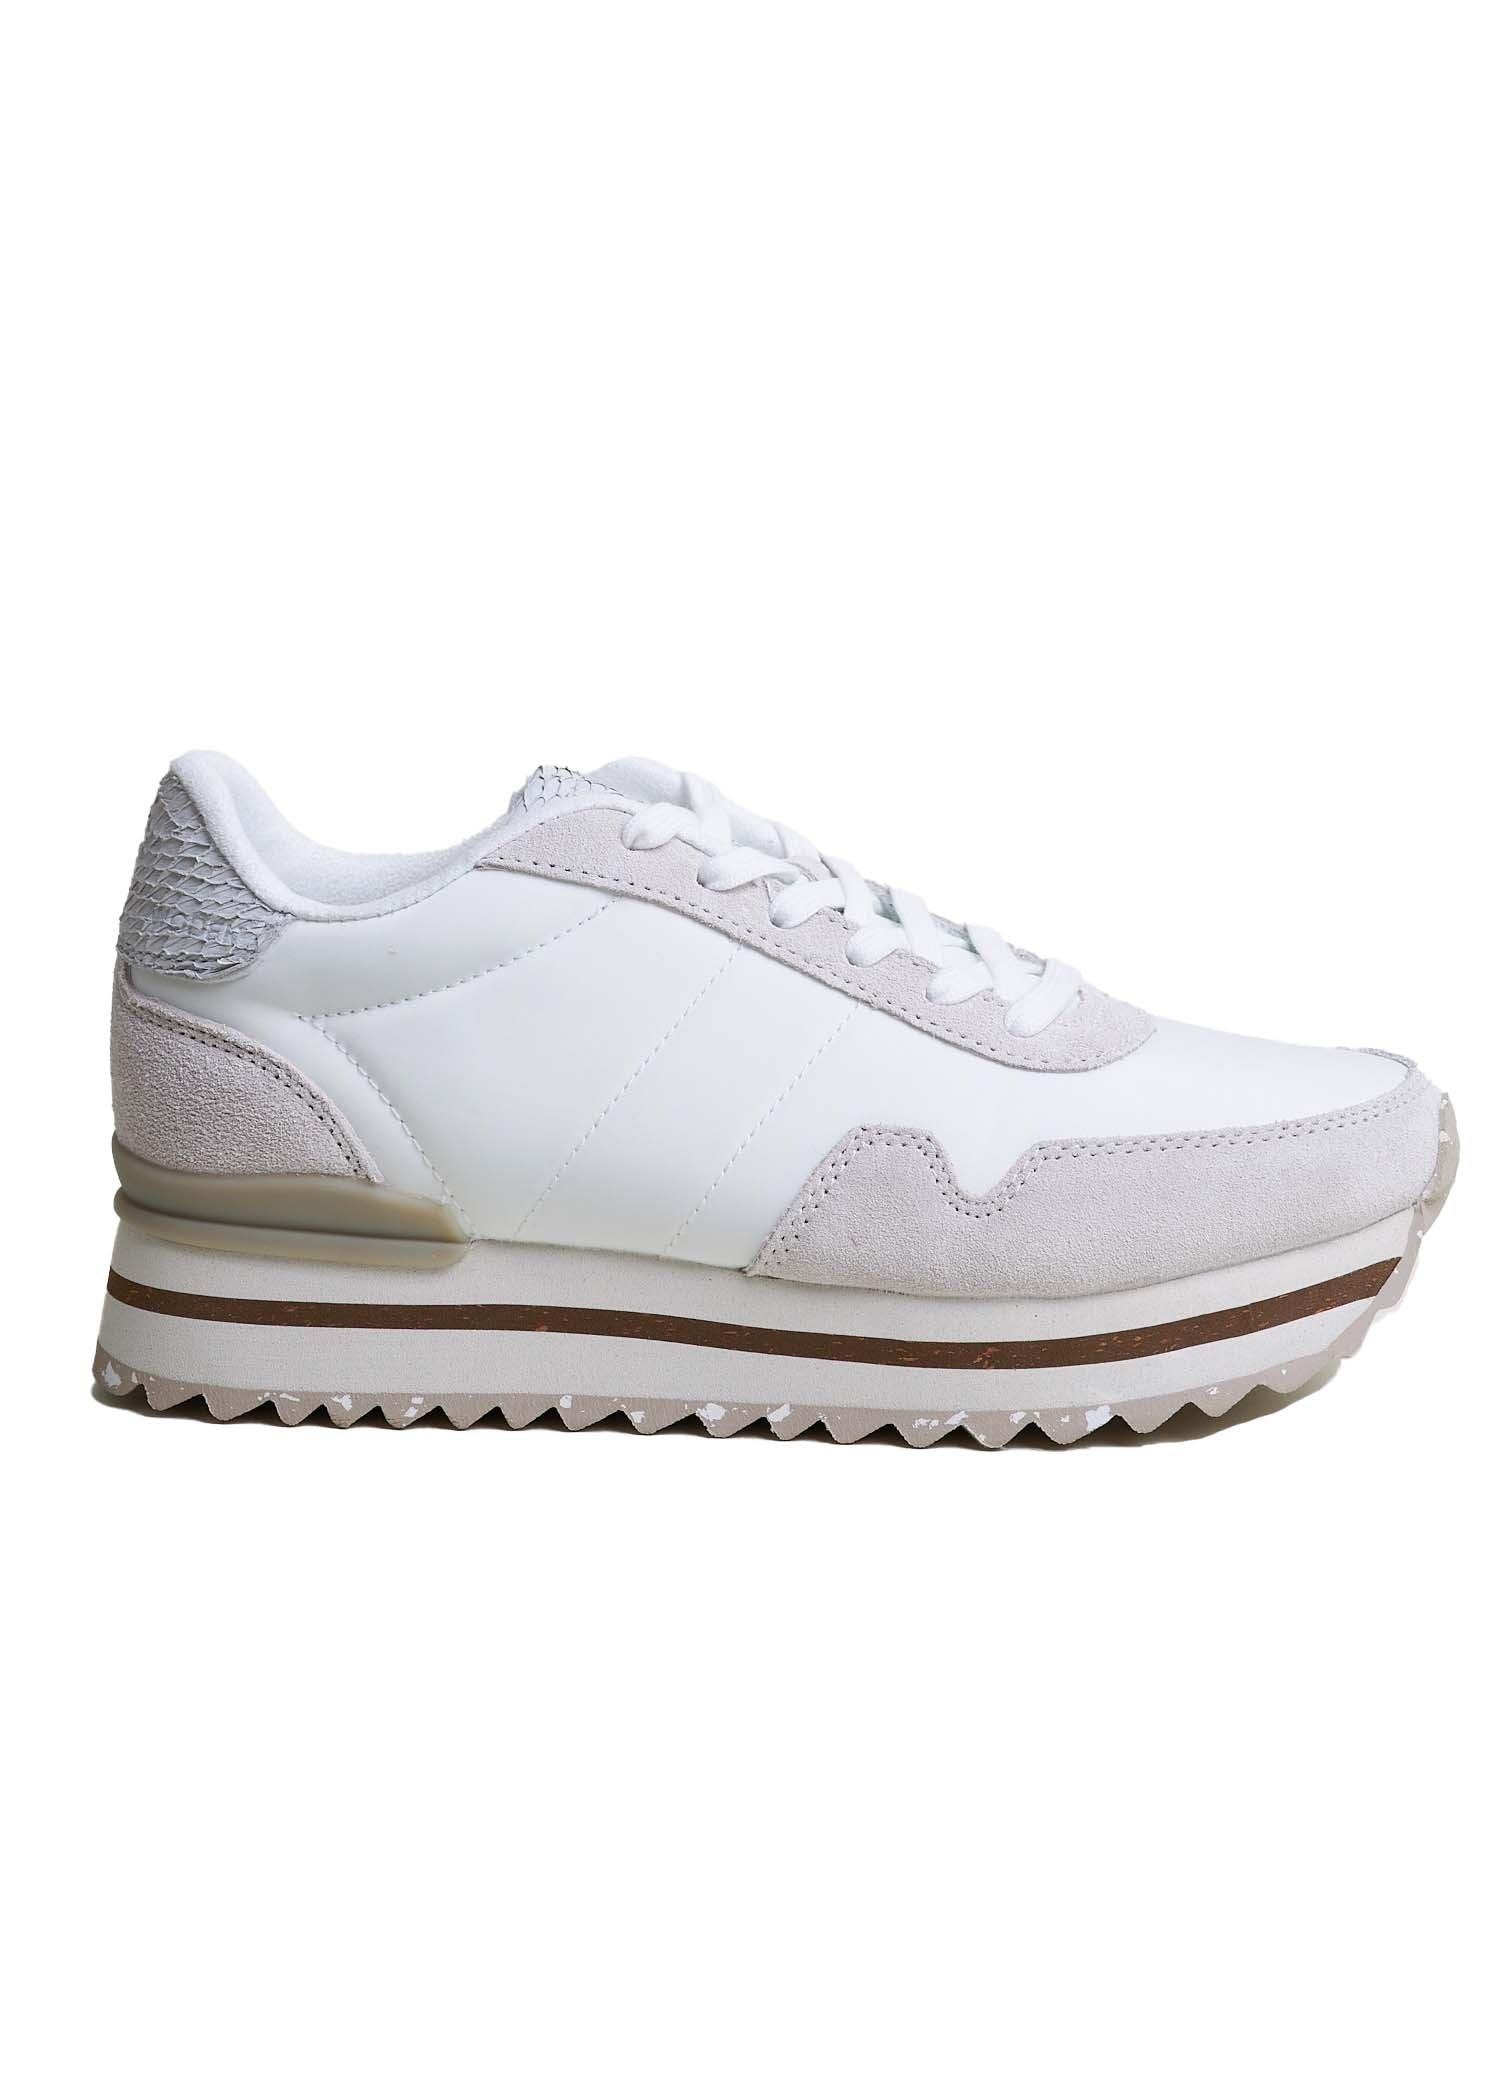 Woden Nora Iii Leather Plateau Trainers in White | Lyst